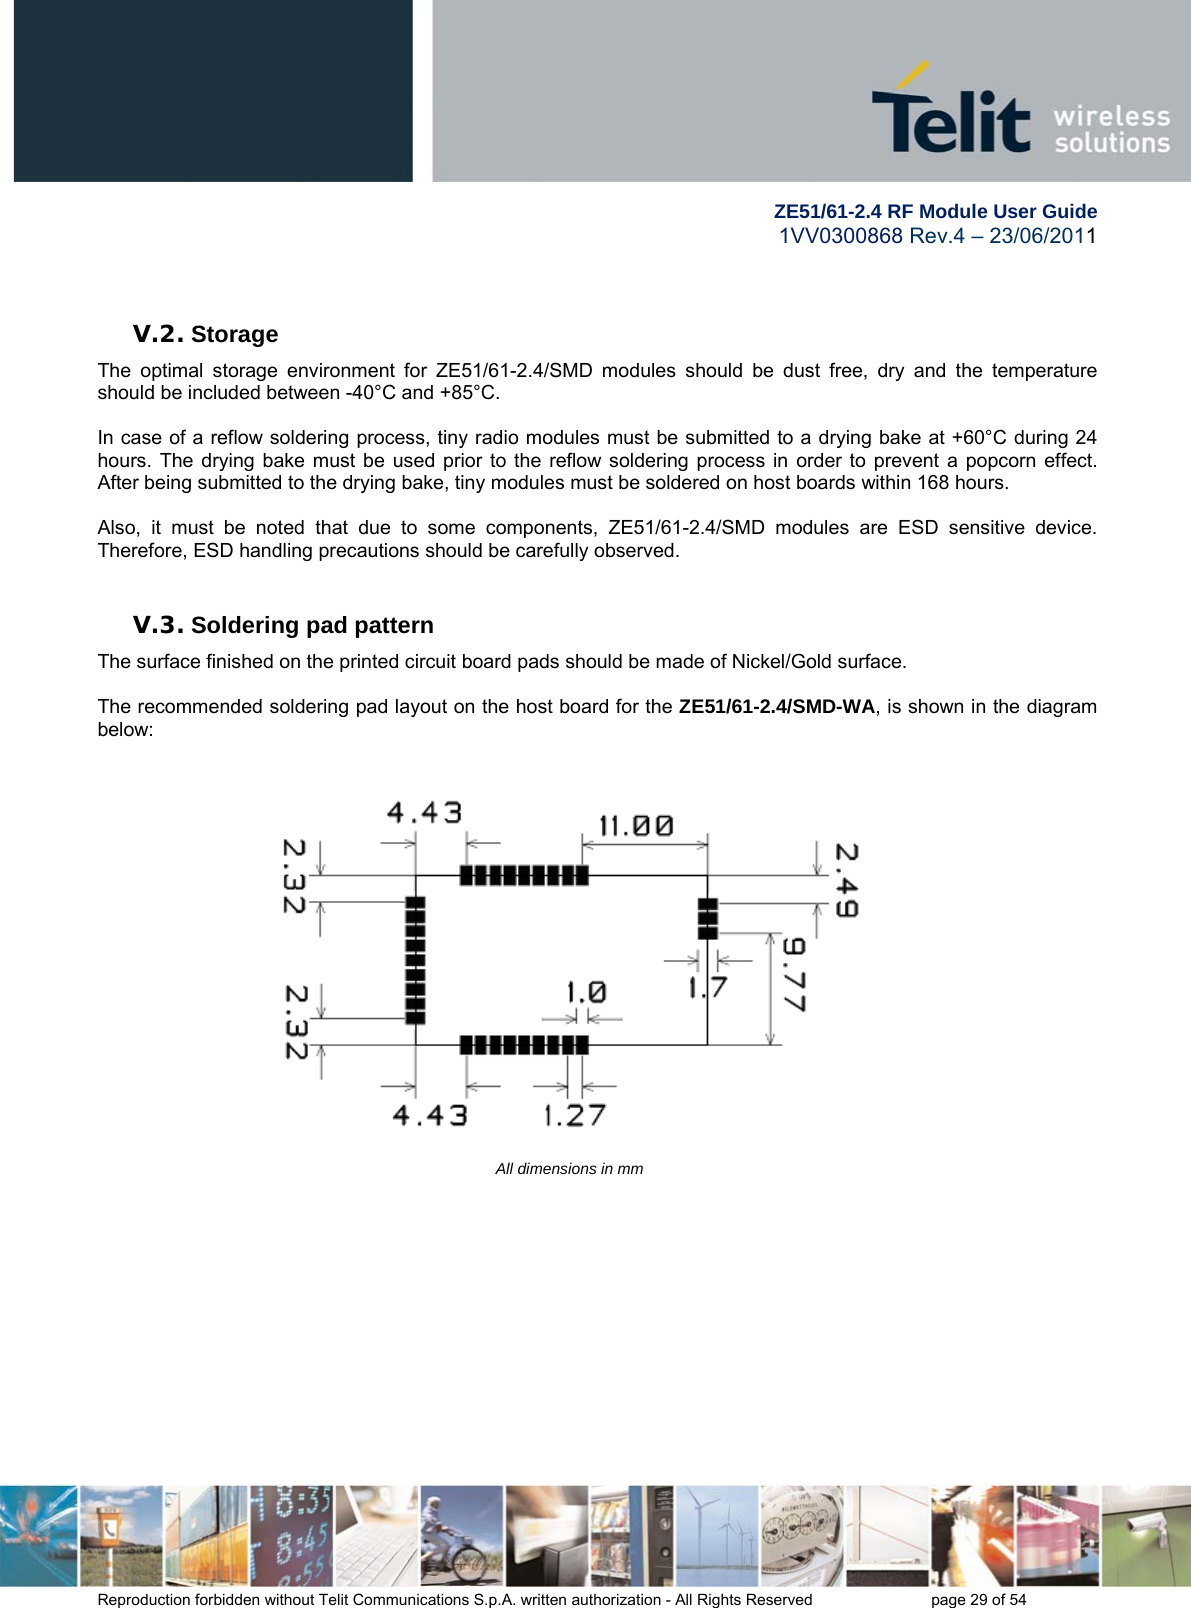        ZE51/61-2.4 RF Module User Guide 1VV0300868 Rev.4 – 23/06/2011 Reproduction forbidden without Telit Communications S.p.A. written authorization - All Rights Reserved    page 29 of 54   V.2. Storage The optimal storage environment for ZE51/61-2.4/SMD modules should be dust free, dry and the temperature should be included between -40°C and +85°C.  In case of a reflow soldering process, tiny radio modules must be submitted to a drying bake at +60°C during 24 hours. The drying bake must be used prior to the reflow soldering process in order to prevent a popcorn effect. After being submitted to the drying bake, tiny modules must be soldered on host boards within 168 hours.   Also, it must be noted that due to some components, ZE51/61-2.4/SMD modules are ESD sensitive device. Therefore, ESD handling precautions should be carefully observed.  V.3. Soldering pad pattern The surface finished on the printed circuit board pads should be made of Nickel/Gold surface.   The recommended soldering pad layout on the host board for the ZE51/61-2.4/SMD-WA, is shown in the diagram below:     All dimensions in mm              